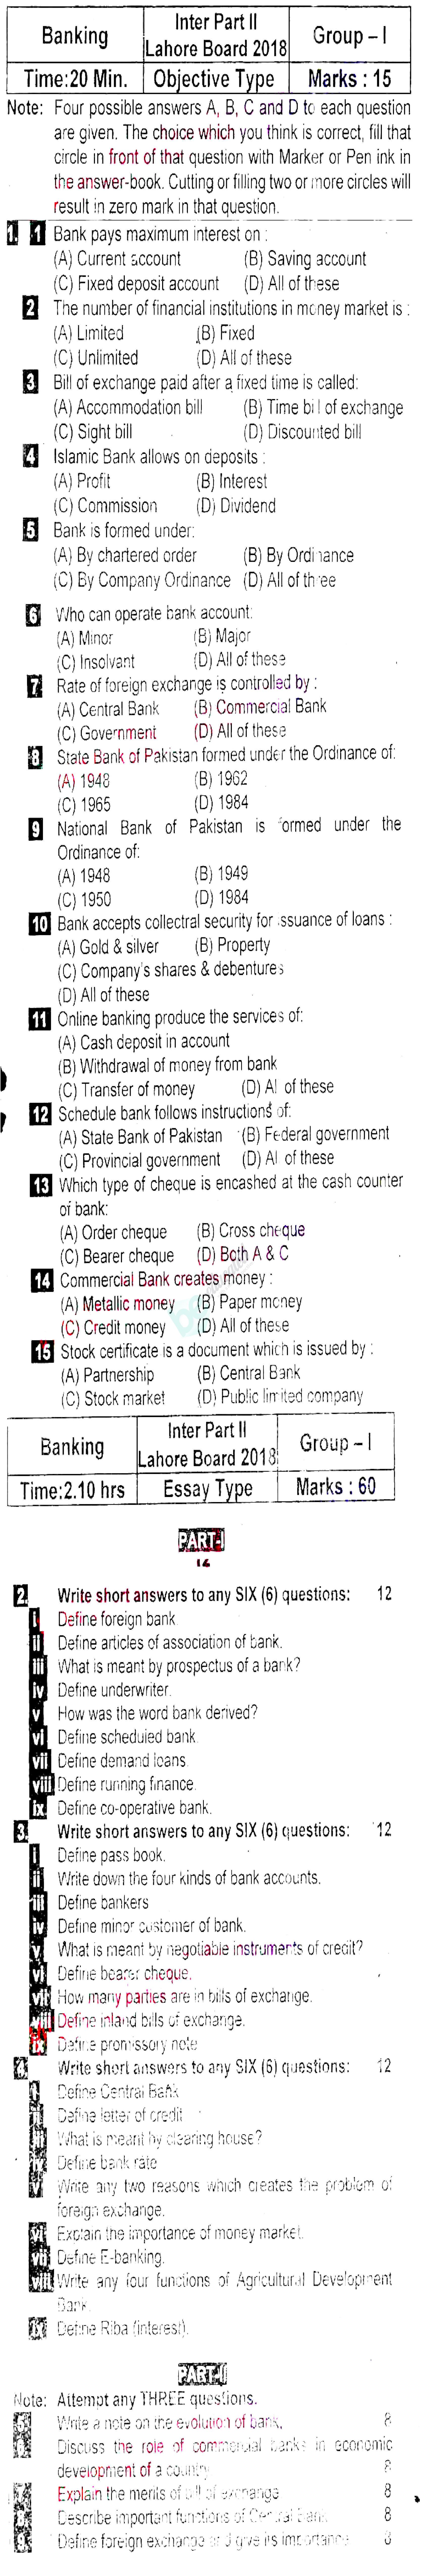 Principles of Banking ICOM Part 2 Past Paper Group 1 BISE Lahore 2018